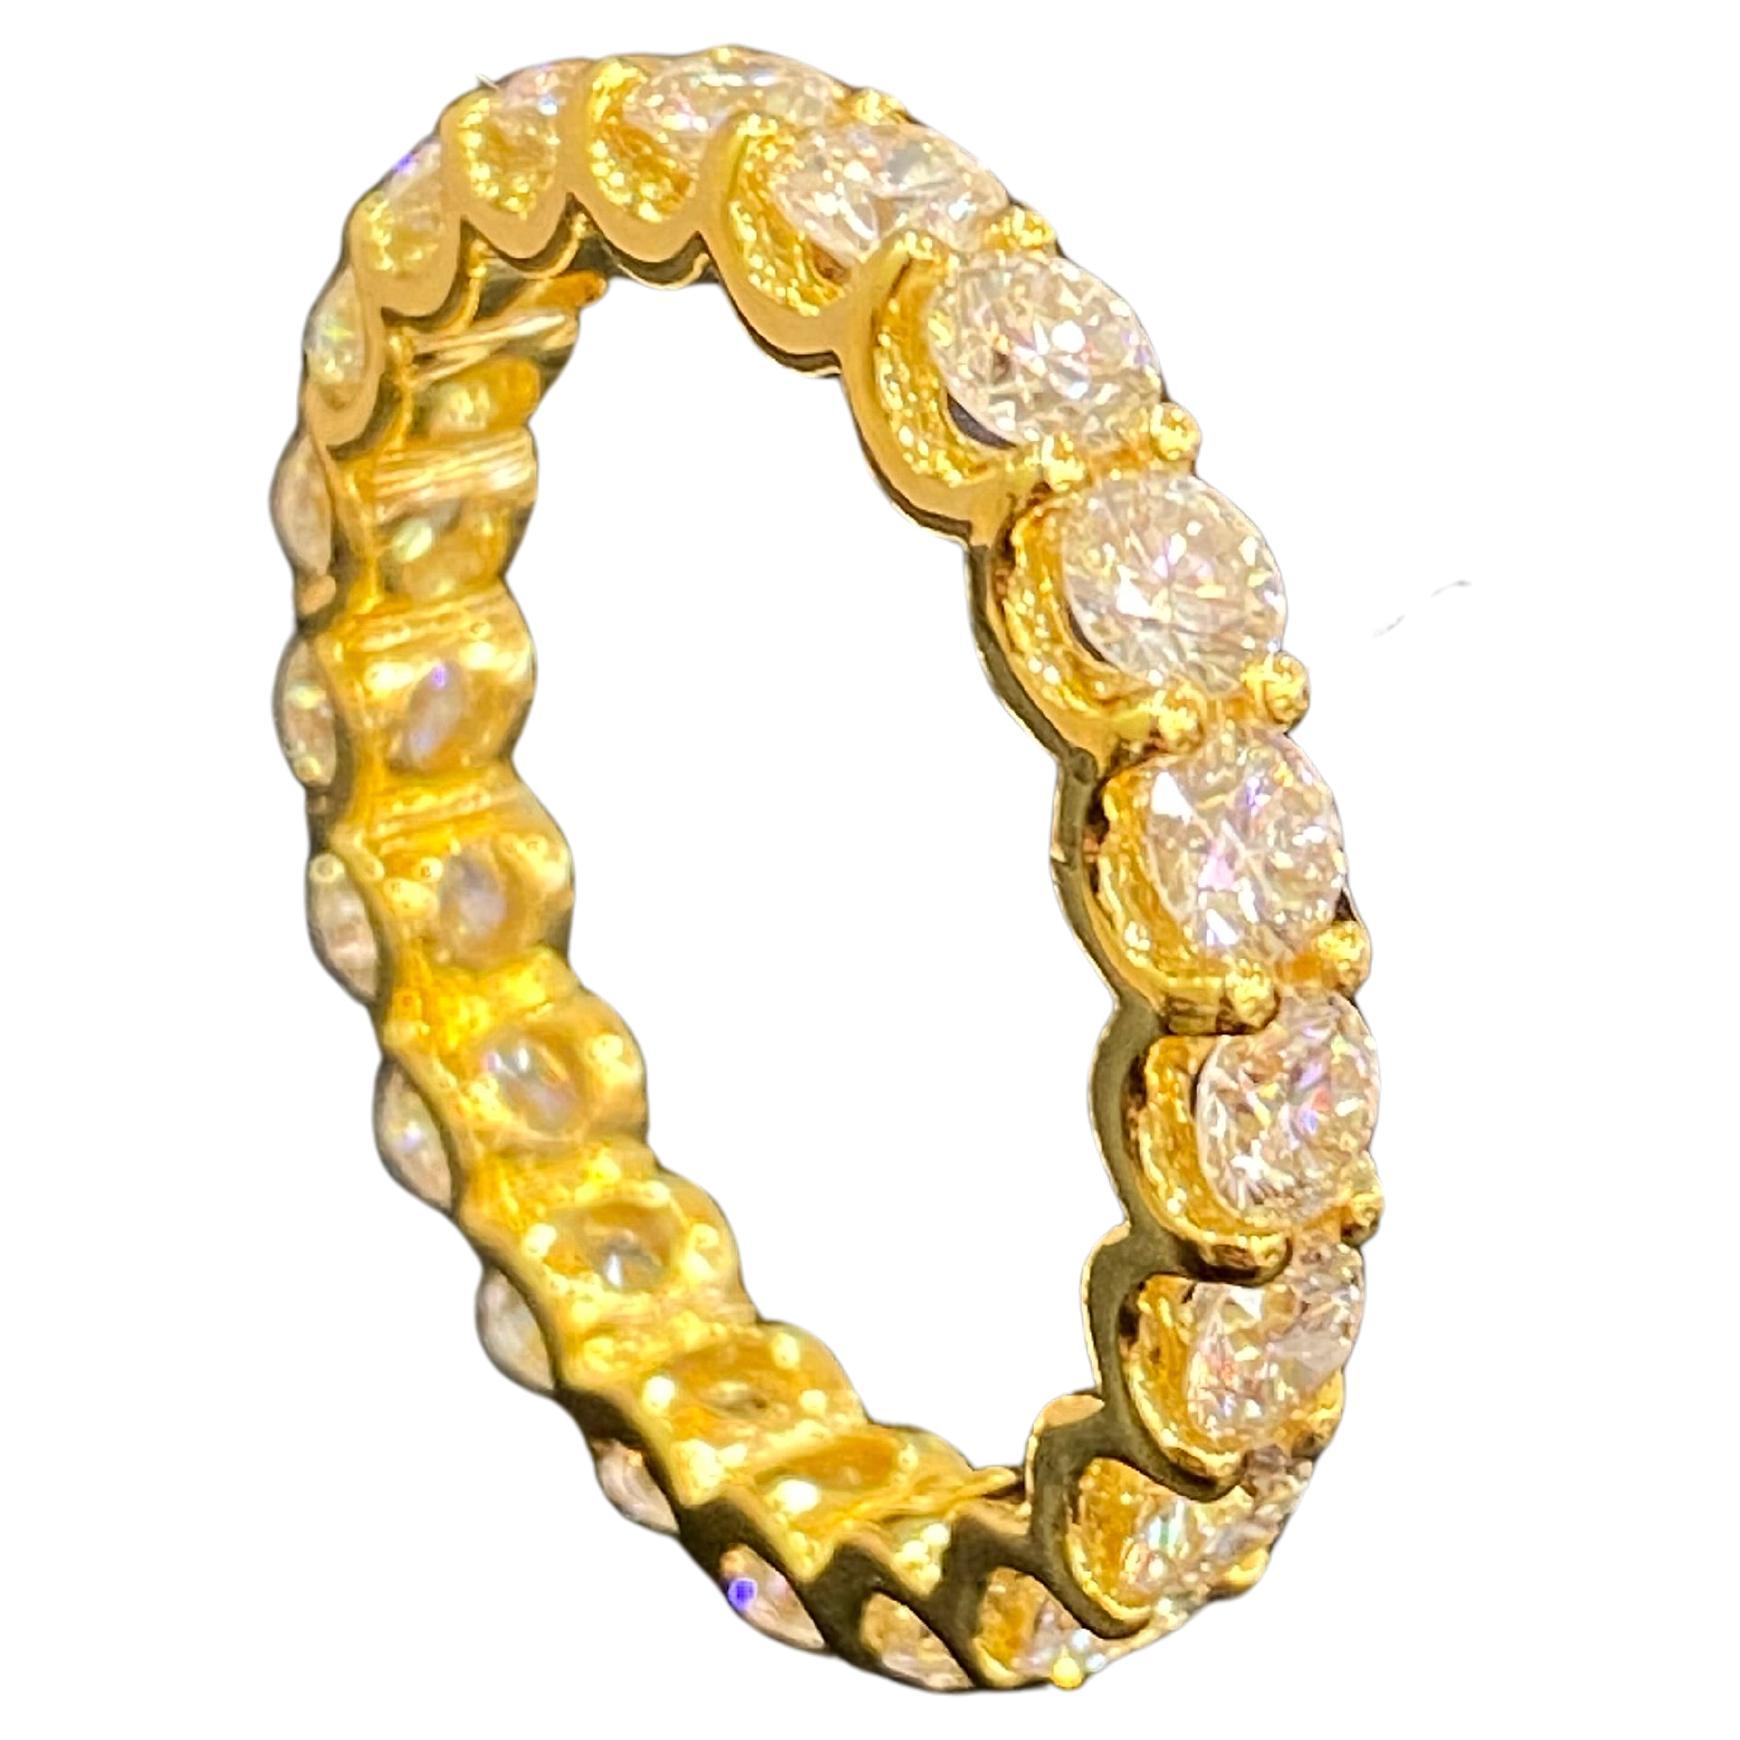 Pave 2.40 Cts F/VS1 Round Brilliant Diamonds Eternity Band Ring 18K Yellow Gold